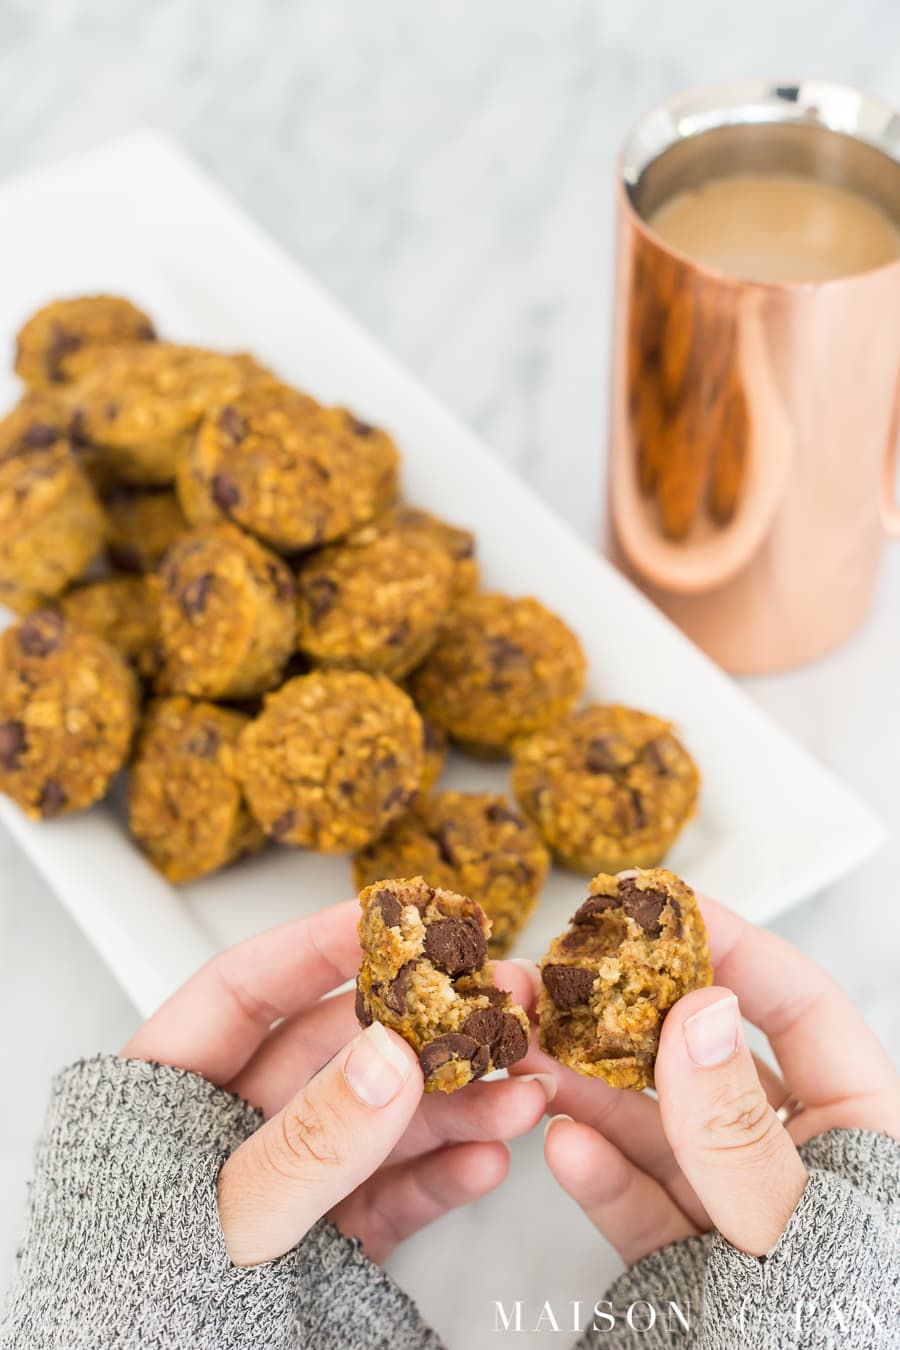 Gluten free pumpkin muffins with 70% cacao chocolate chips: Made with applesauce and a touch of maple syrup for sweetening, oat flour, and pumpkin, these are packed with delicious flavor and nutritious ingredients #gf #glutenfree #pumpkinspice #fallrecipe #pumpkinrecipe #pumpkinmuffins #breakfast #gfbreakfast 